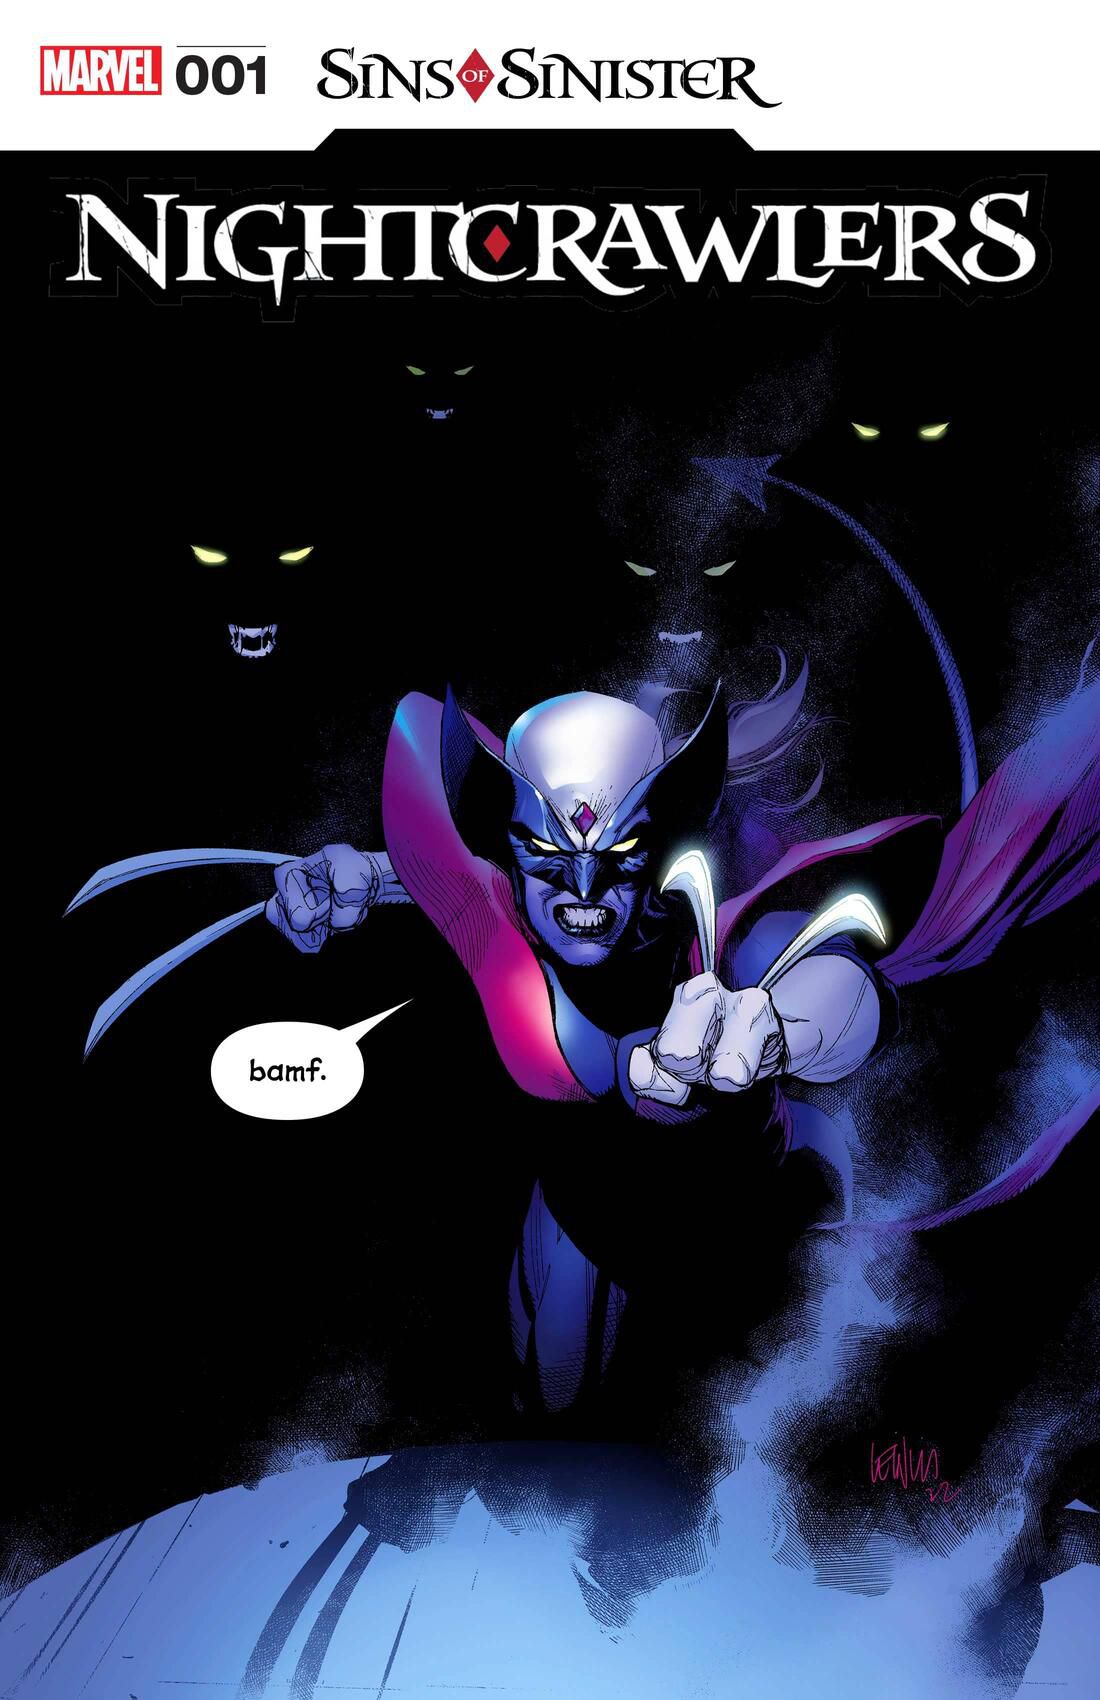 “bamf,” says a Laura Kinney/Nightcrawler hybrid, with more Nightcrawler hybrids behind her, as she leaps towards the reader with her claws out, on the cover of Nightcrawlers #1 (2023). 